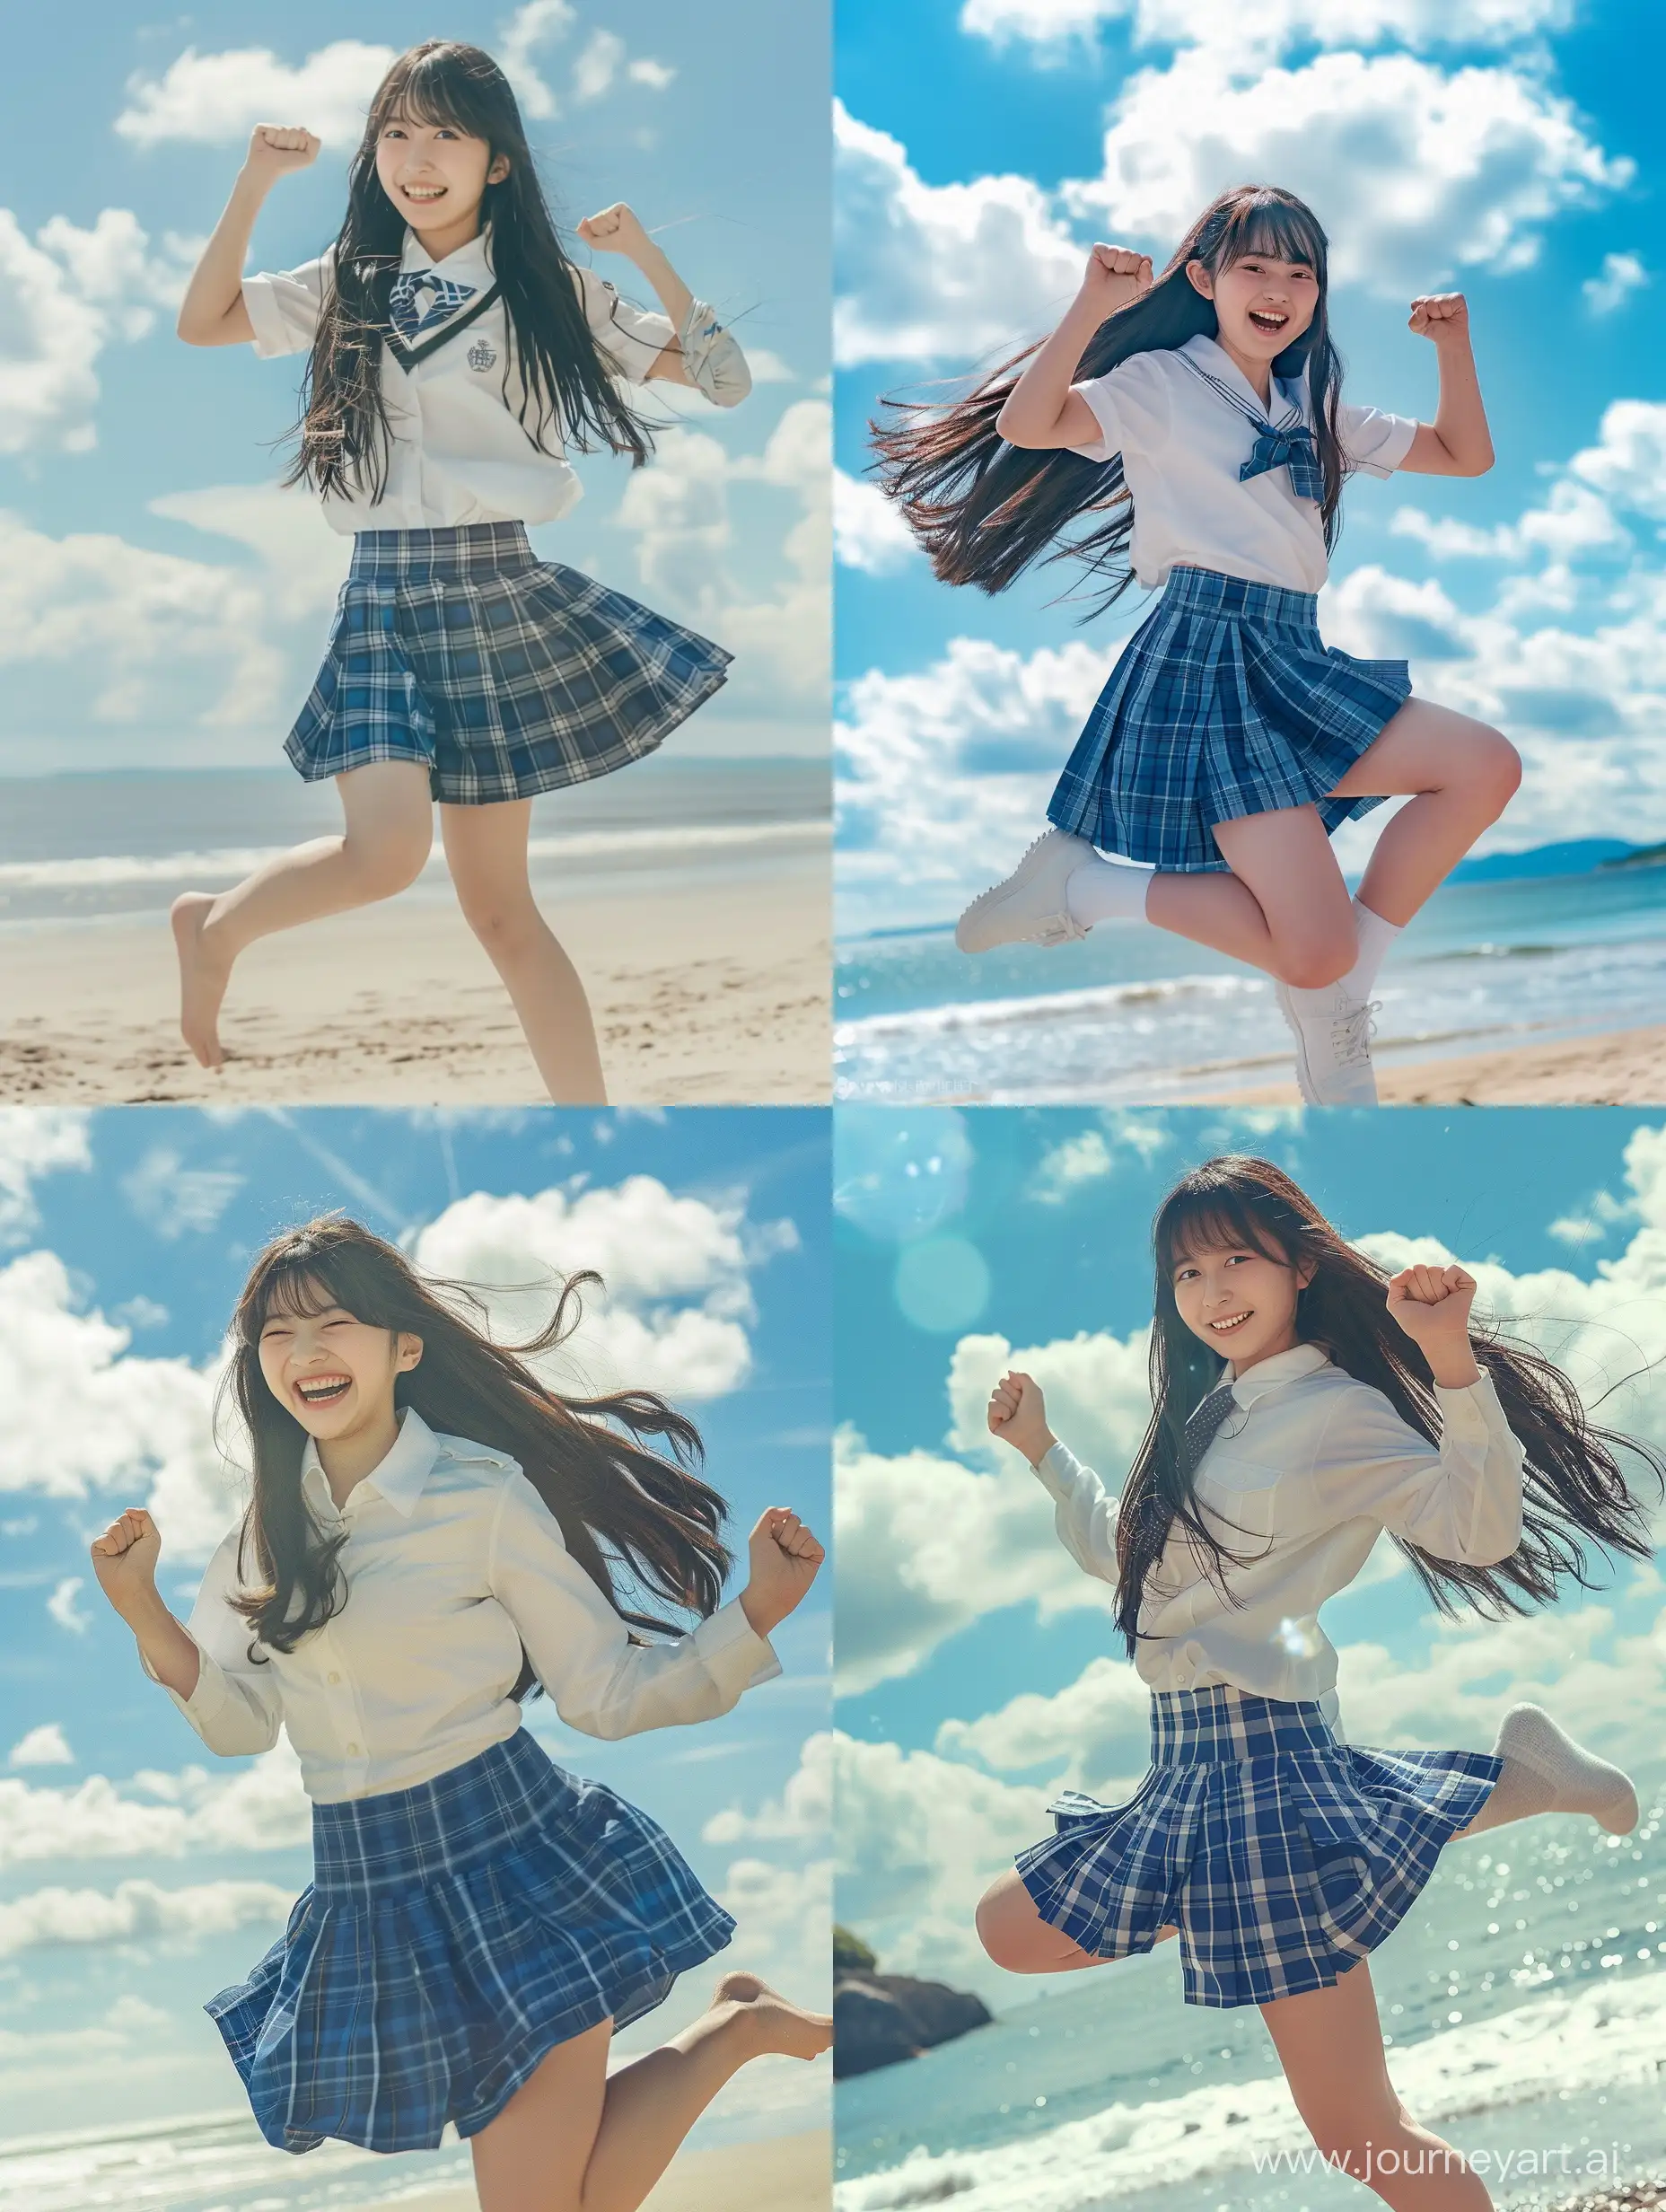 Stylish-Japanese-High-School-Student-Poses-with-80s-Photo-Album-at-Seaside